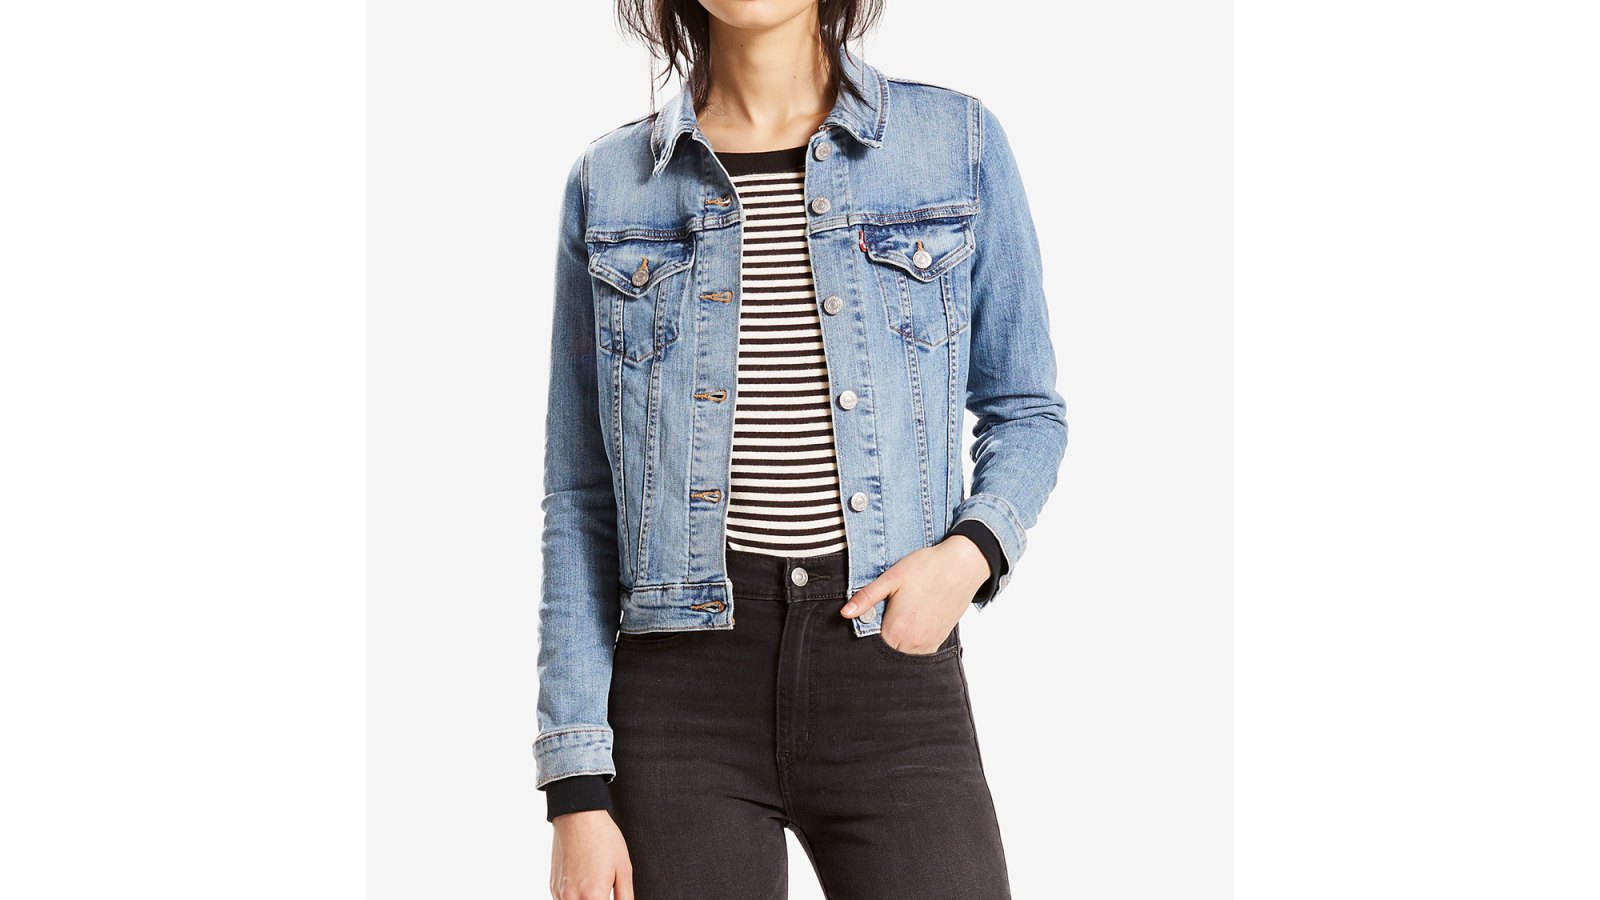 Levi's Original Denim Trucker Jacket at Macy's Is Perfect for Fall